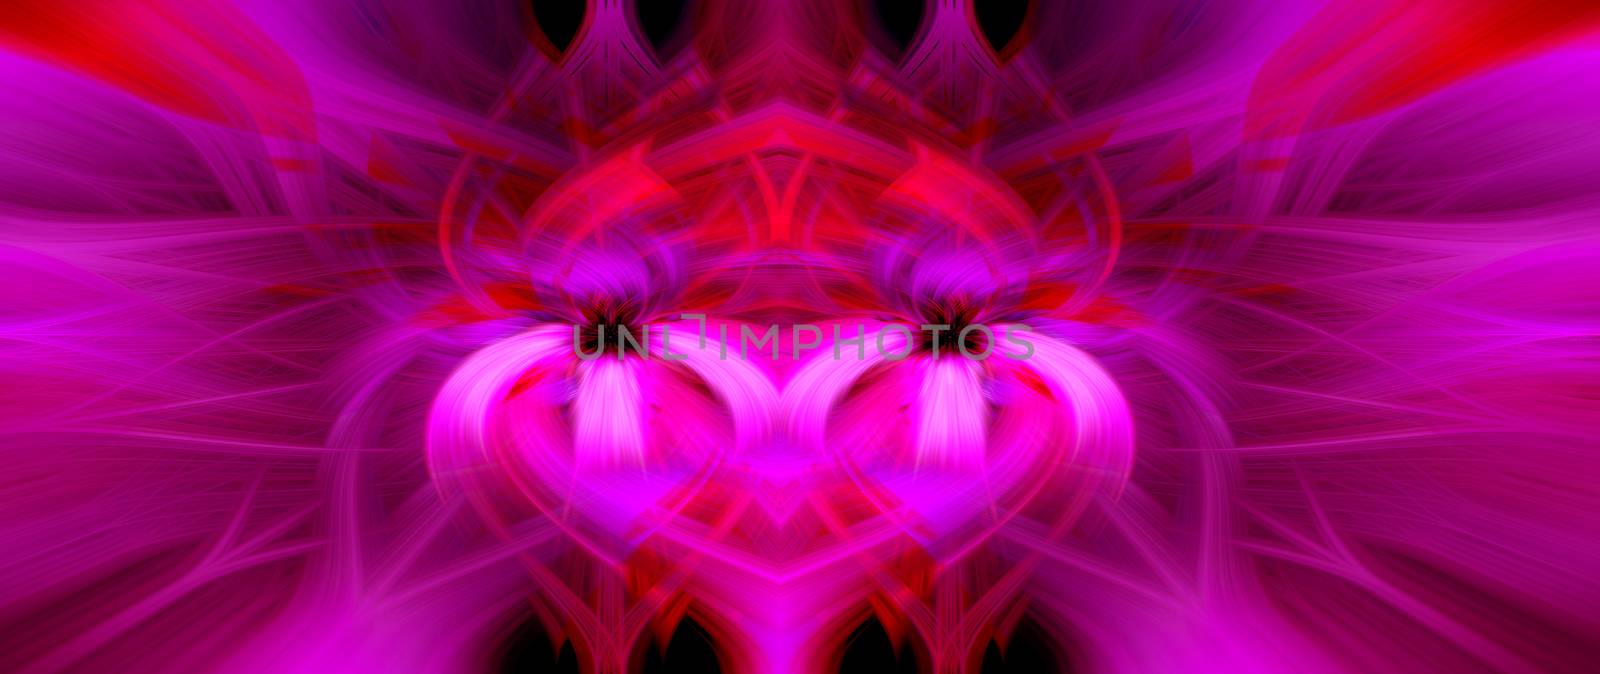 Beautiful abstract intertwined 3d fibers forming a shape of sparkle, flame, flower, interlinked hearts. Pink, purple, maroon and red colors. Illustration. Banner and panorama size.